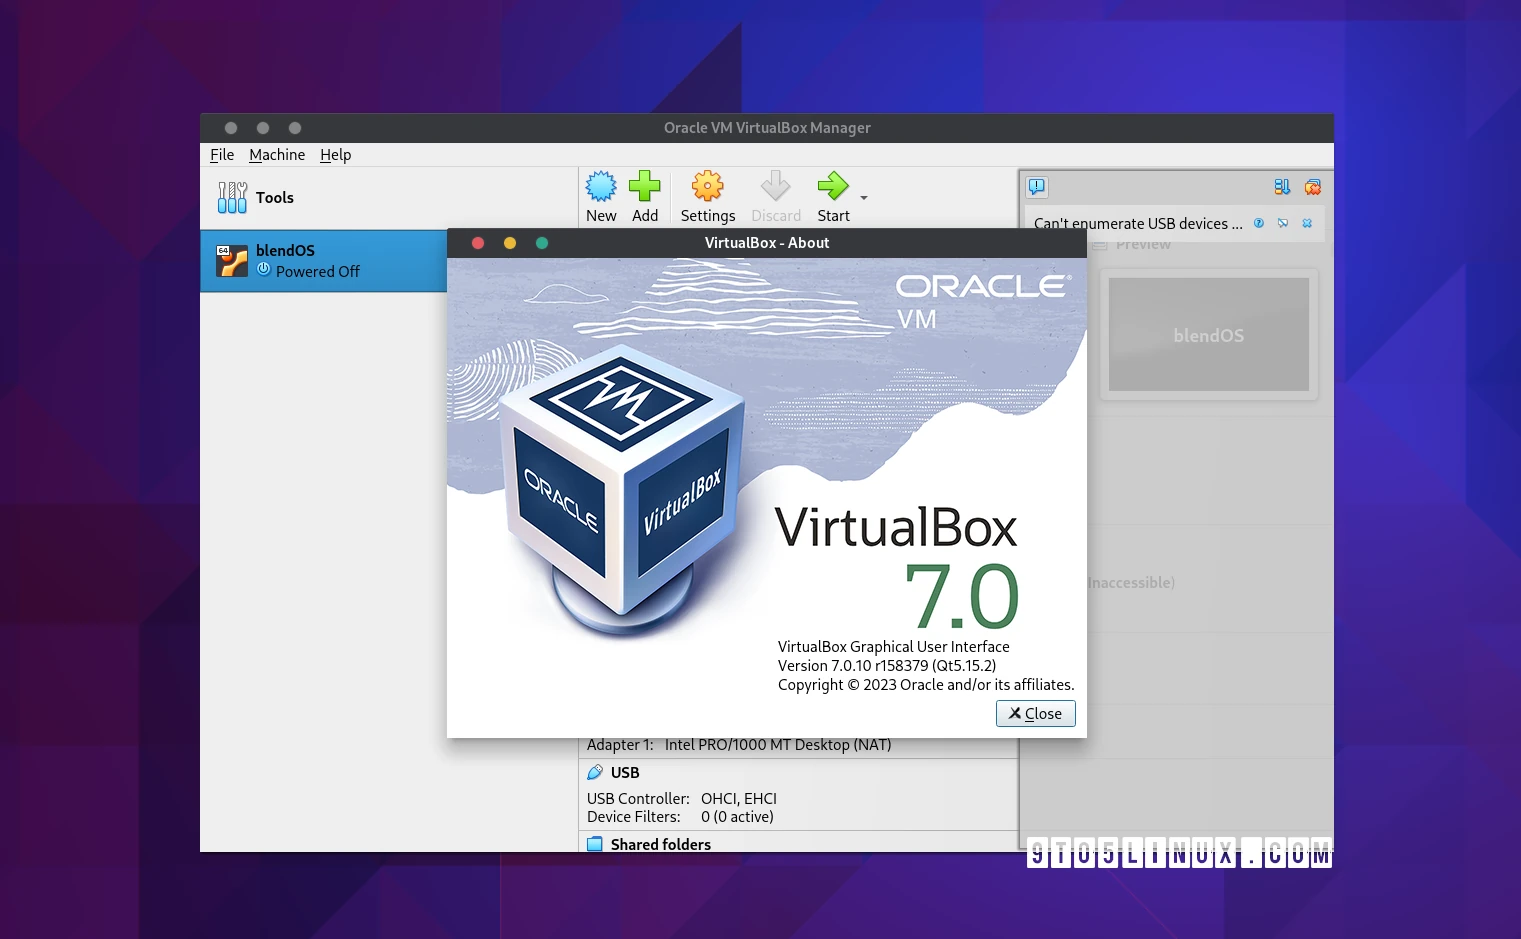 VirtualBox 7.0.10 Released with Initial Support for Linux Kernels 6.4 and 6.5